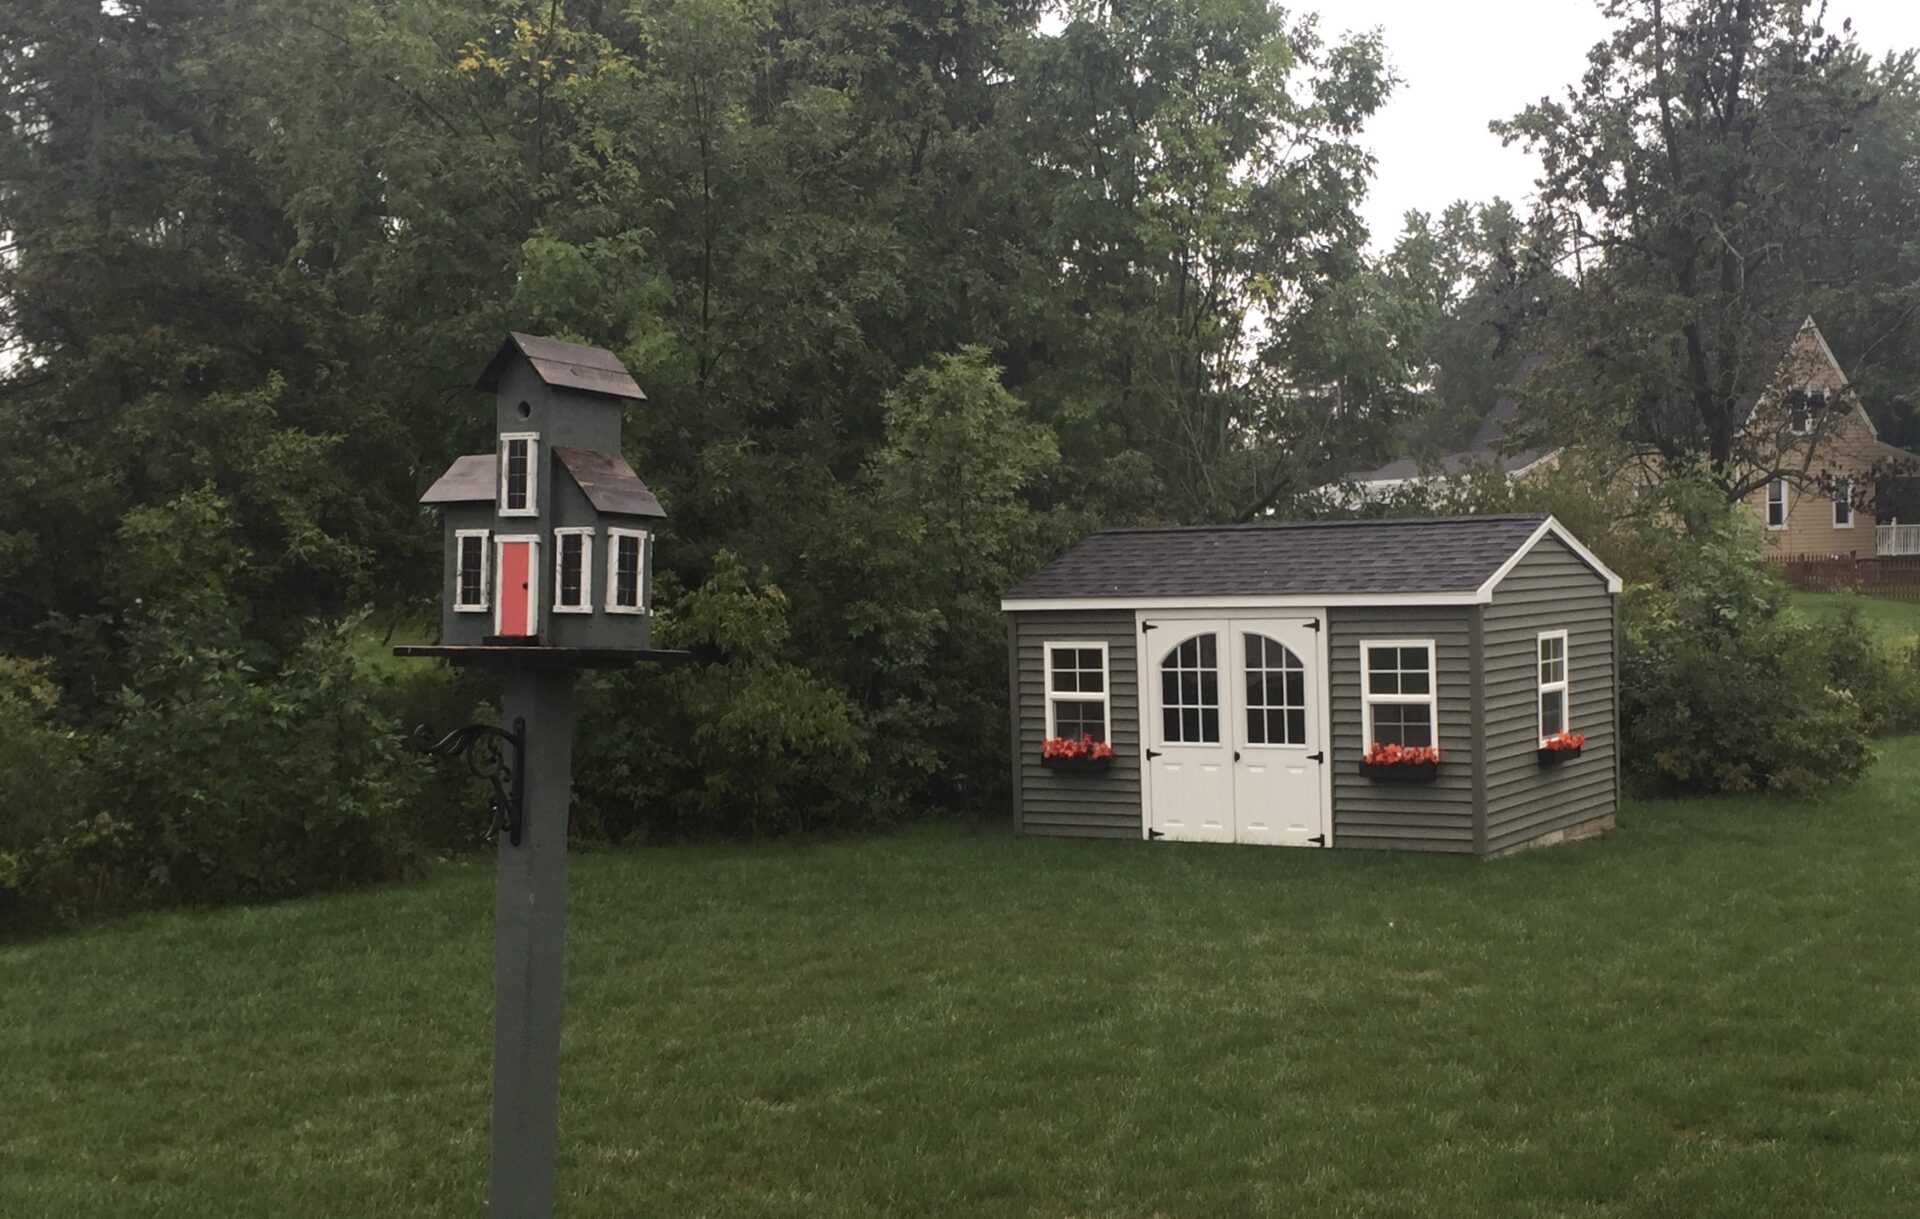 A birdhouse in the middle of a yard.